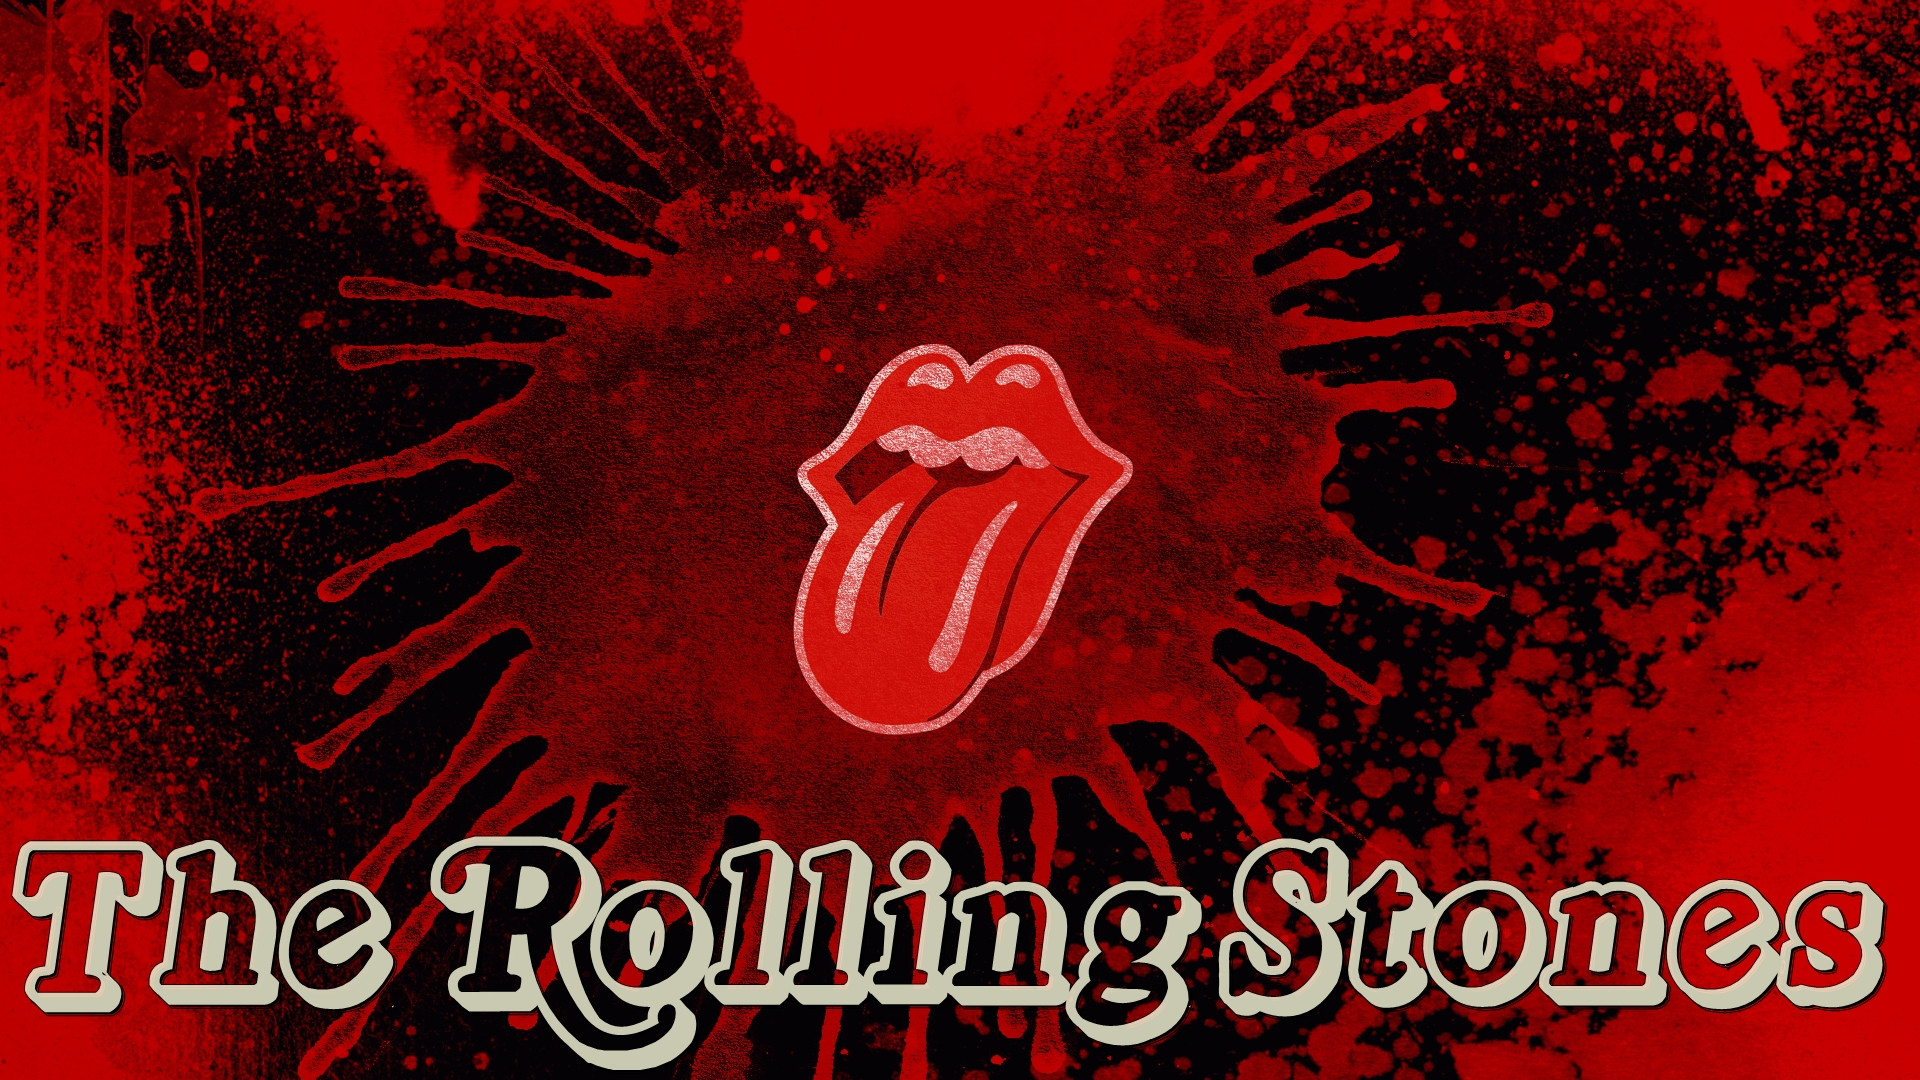 Music The Rolling Stones Wallpaper - Resolution:1920x1080 - ID:958069 - wal...